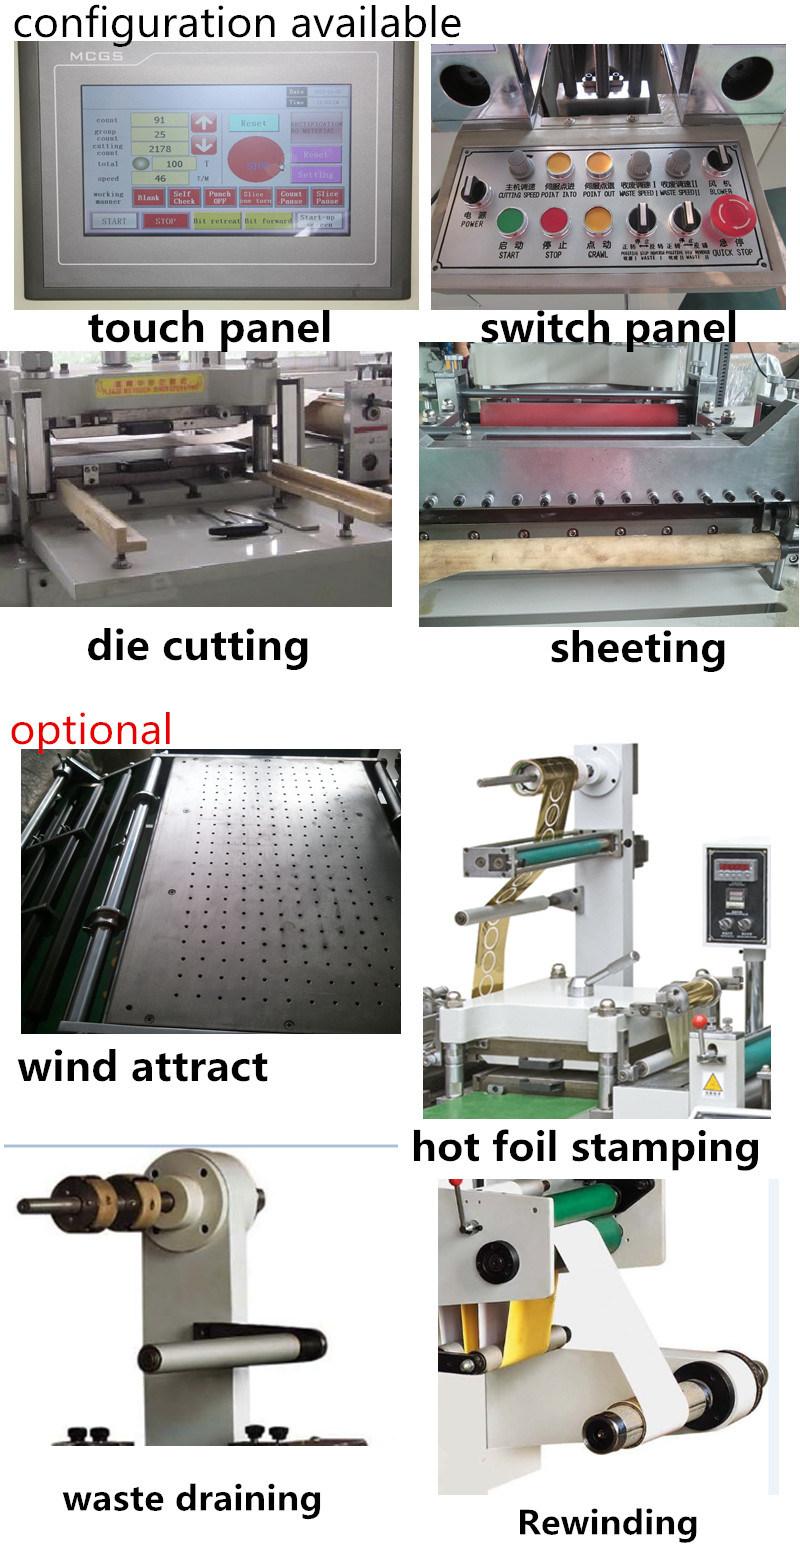 Automatic Die Cutting Machine for 3m Double Adhesive Tape